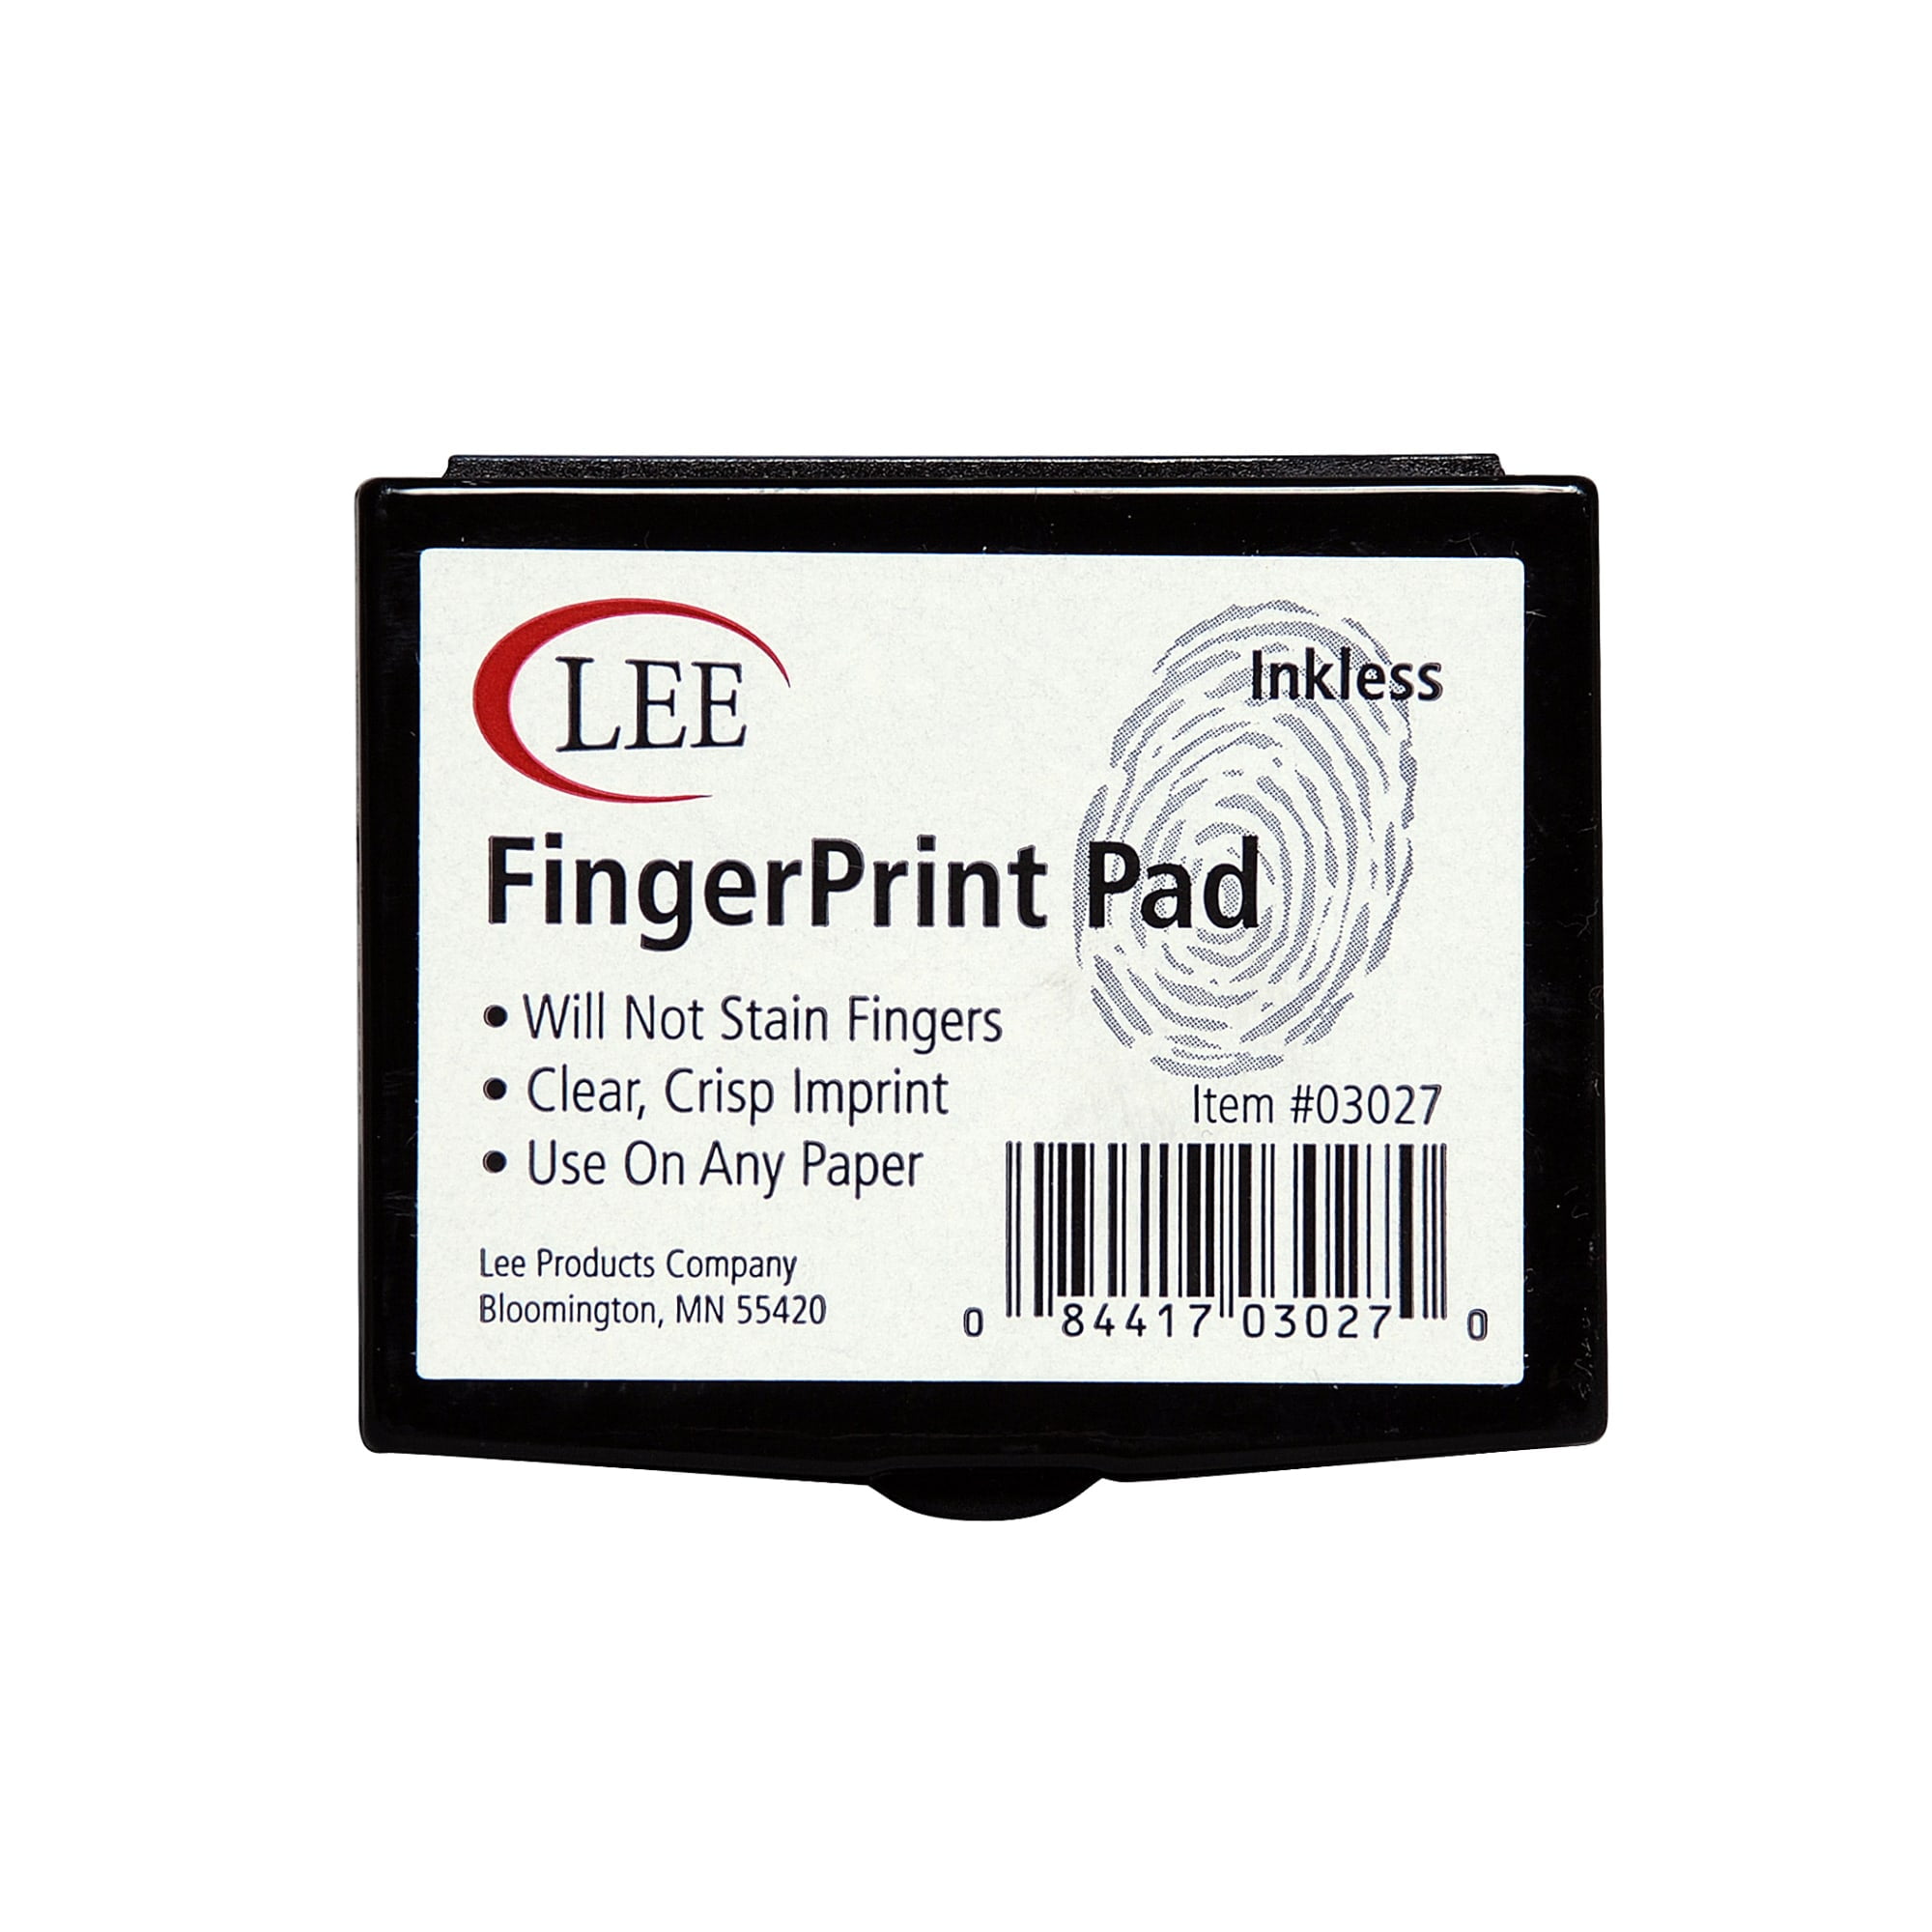 25 New Inkless Fingerprint Pad NotaryPawn BuyIt Now 